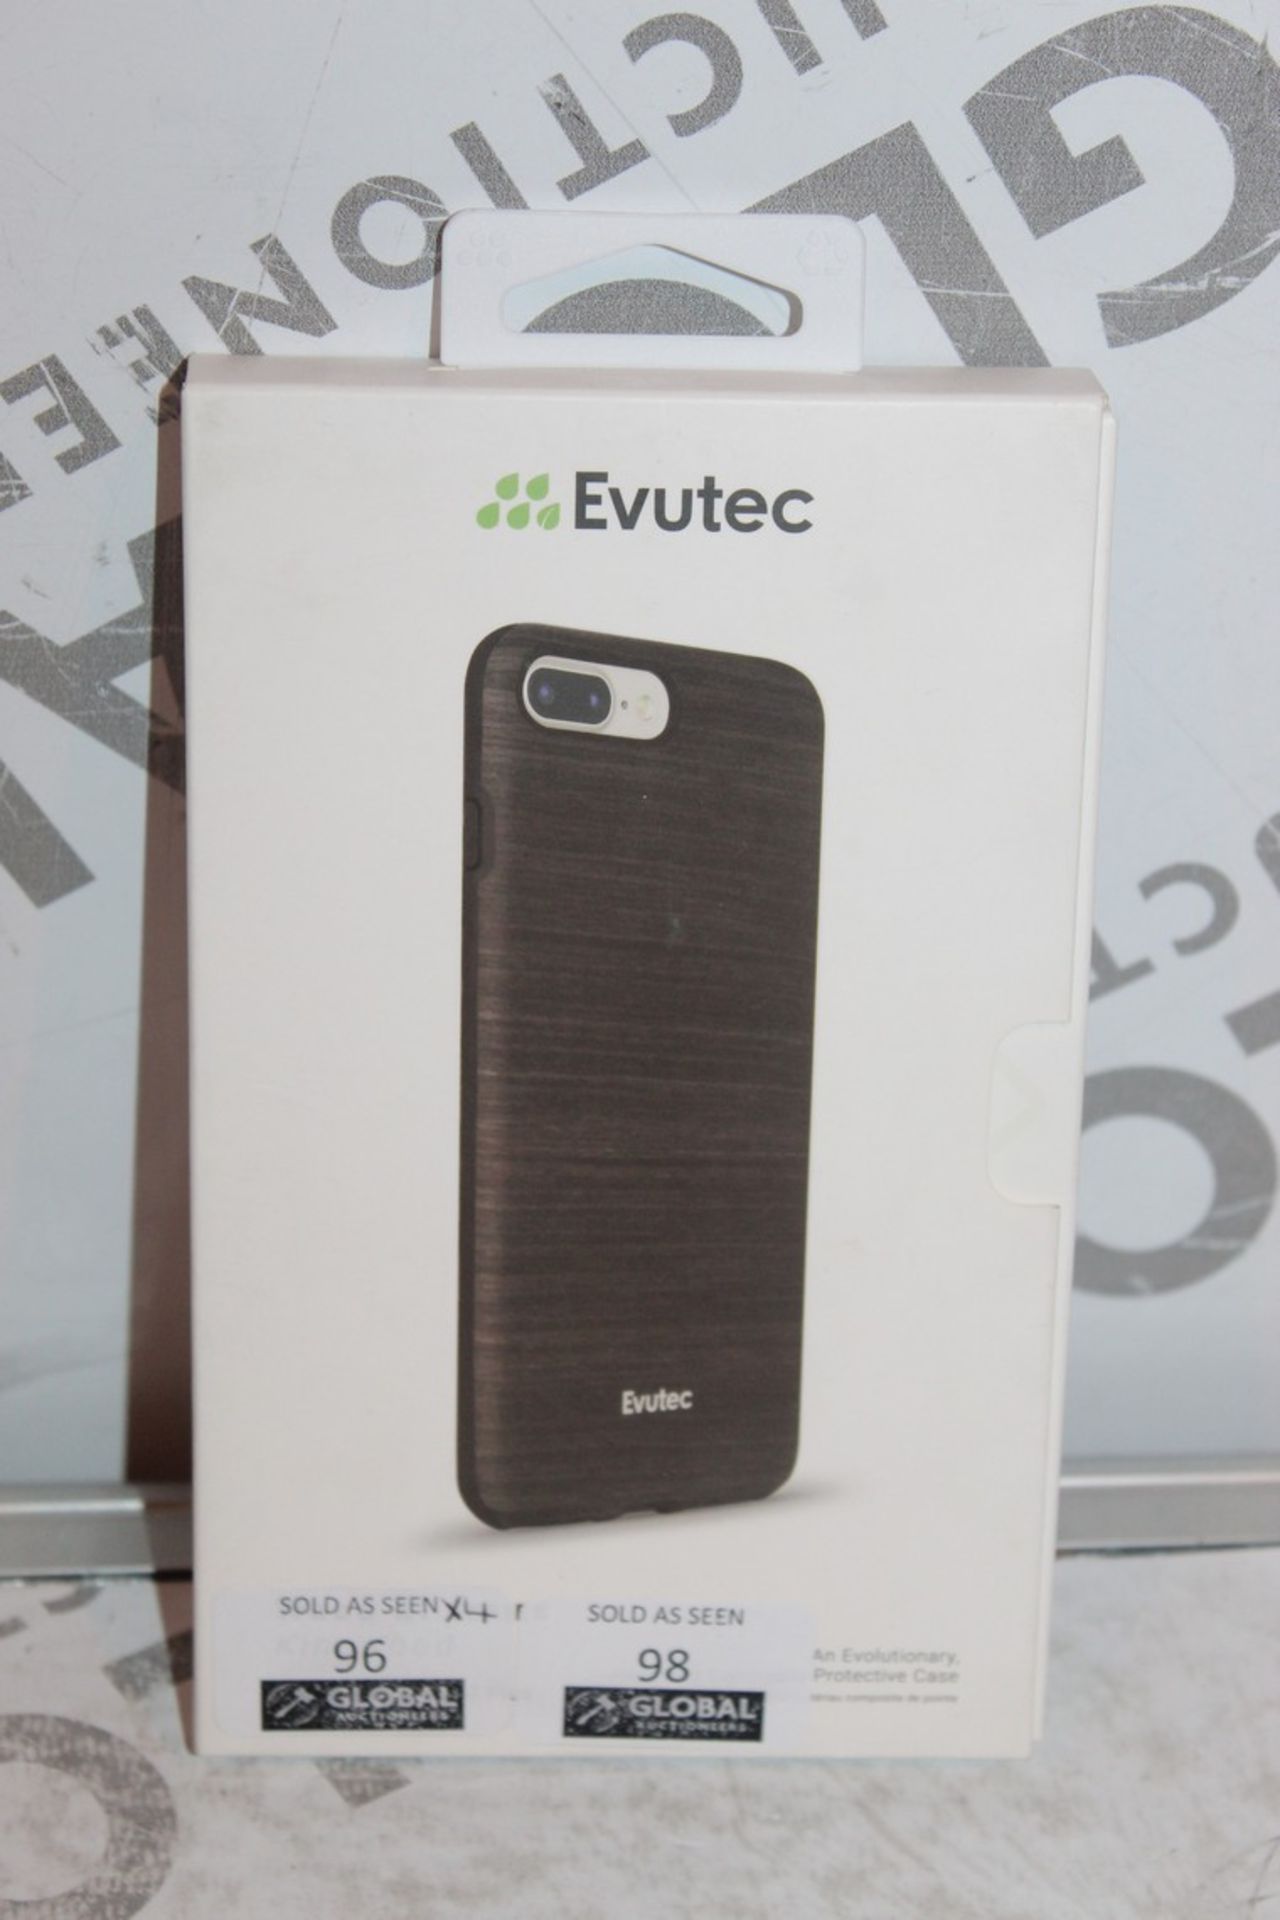 Lot to Contain 4 Brand-New, Evutec iPhone 7+ Phone Cases, Combined RRP£80.00